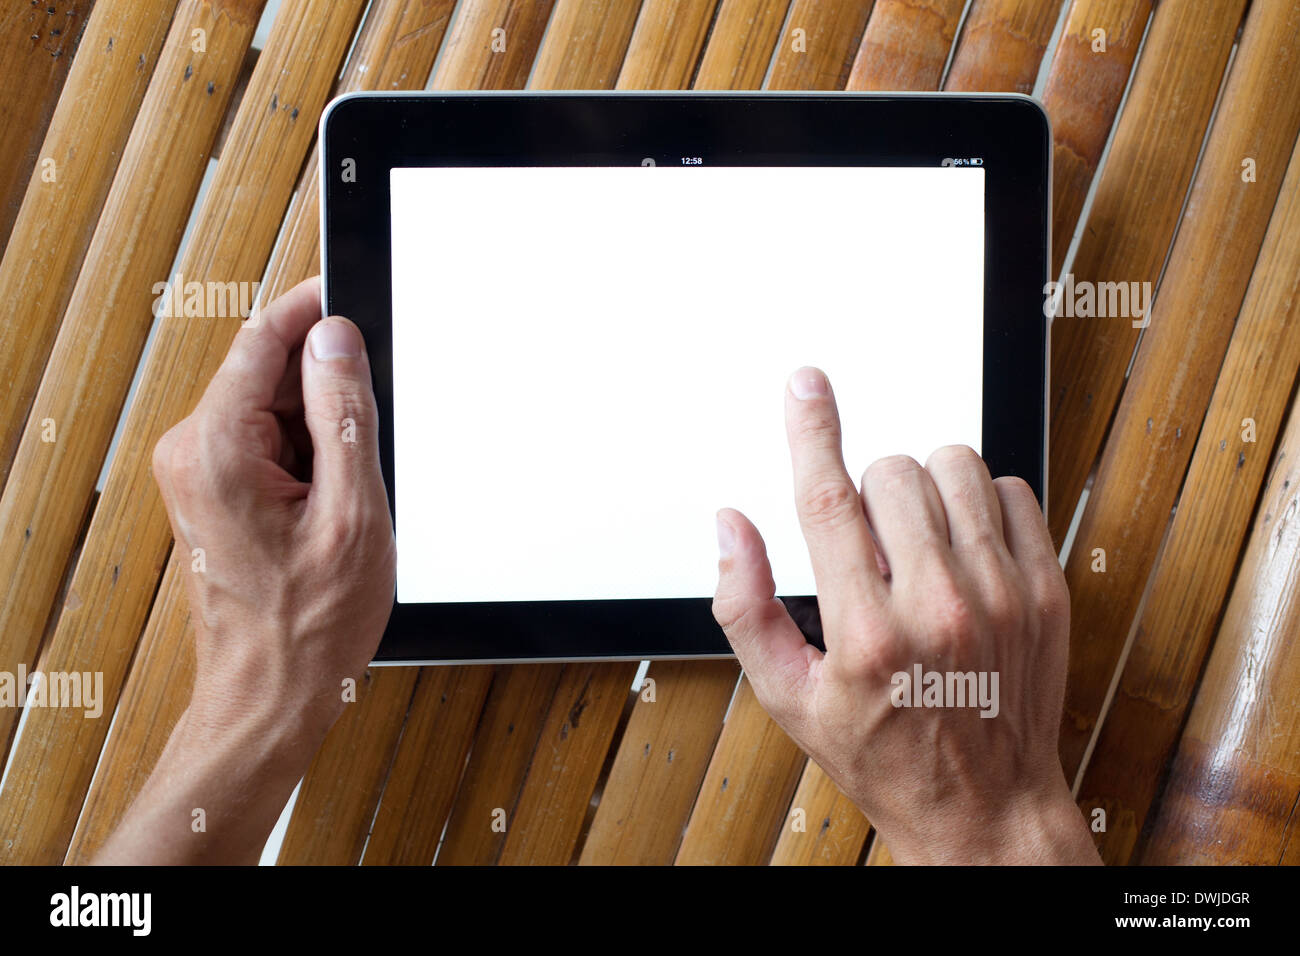 hands holding tablet Stock Photo